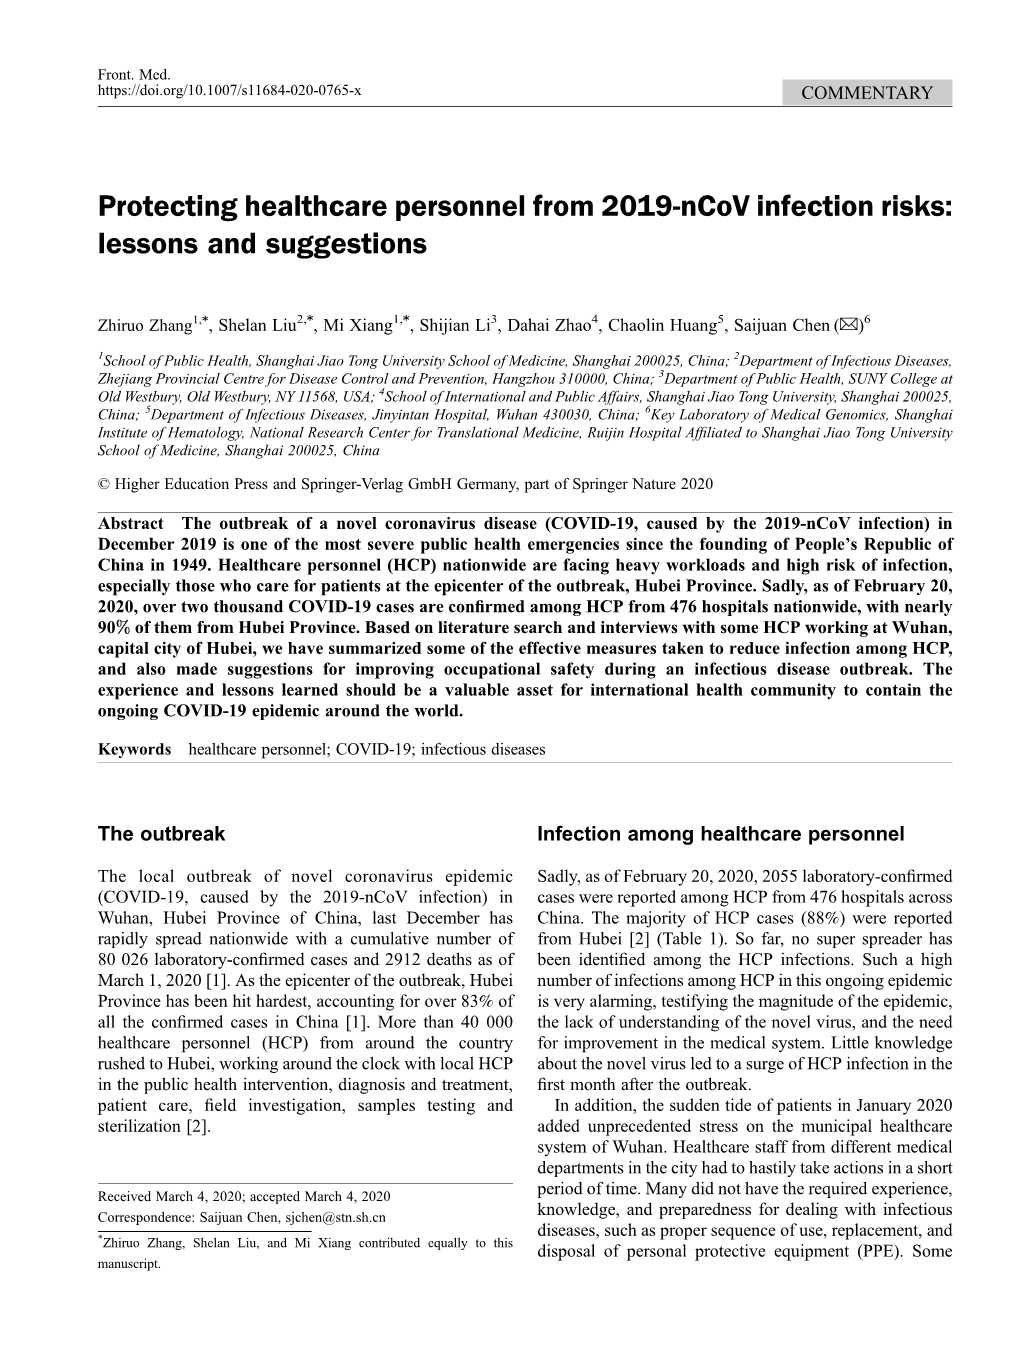 Protecting Healthcare Personnel from 2019-Ncov Infection Risks: Lessons and Suggestions